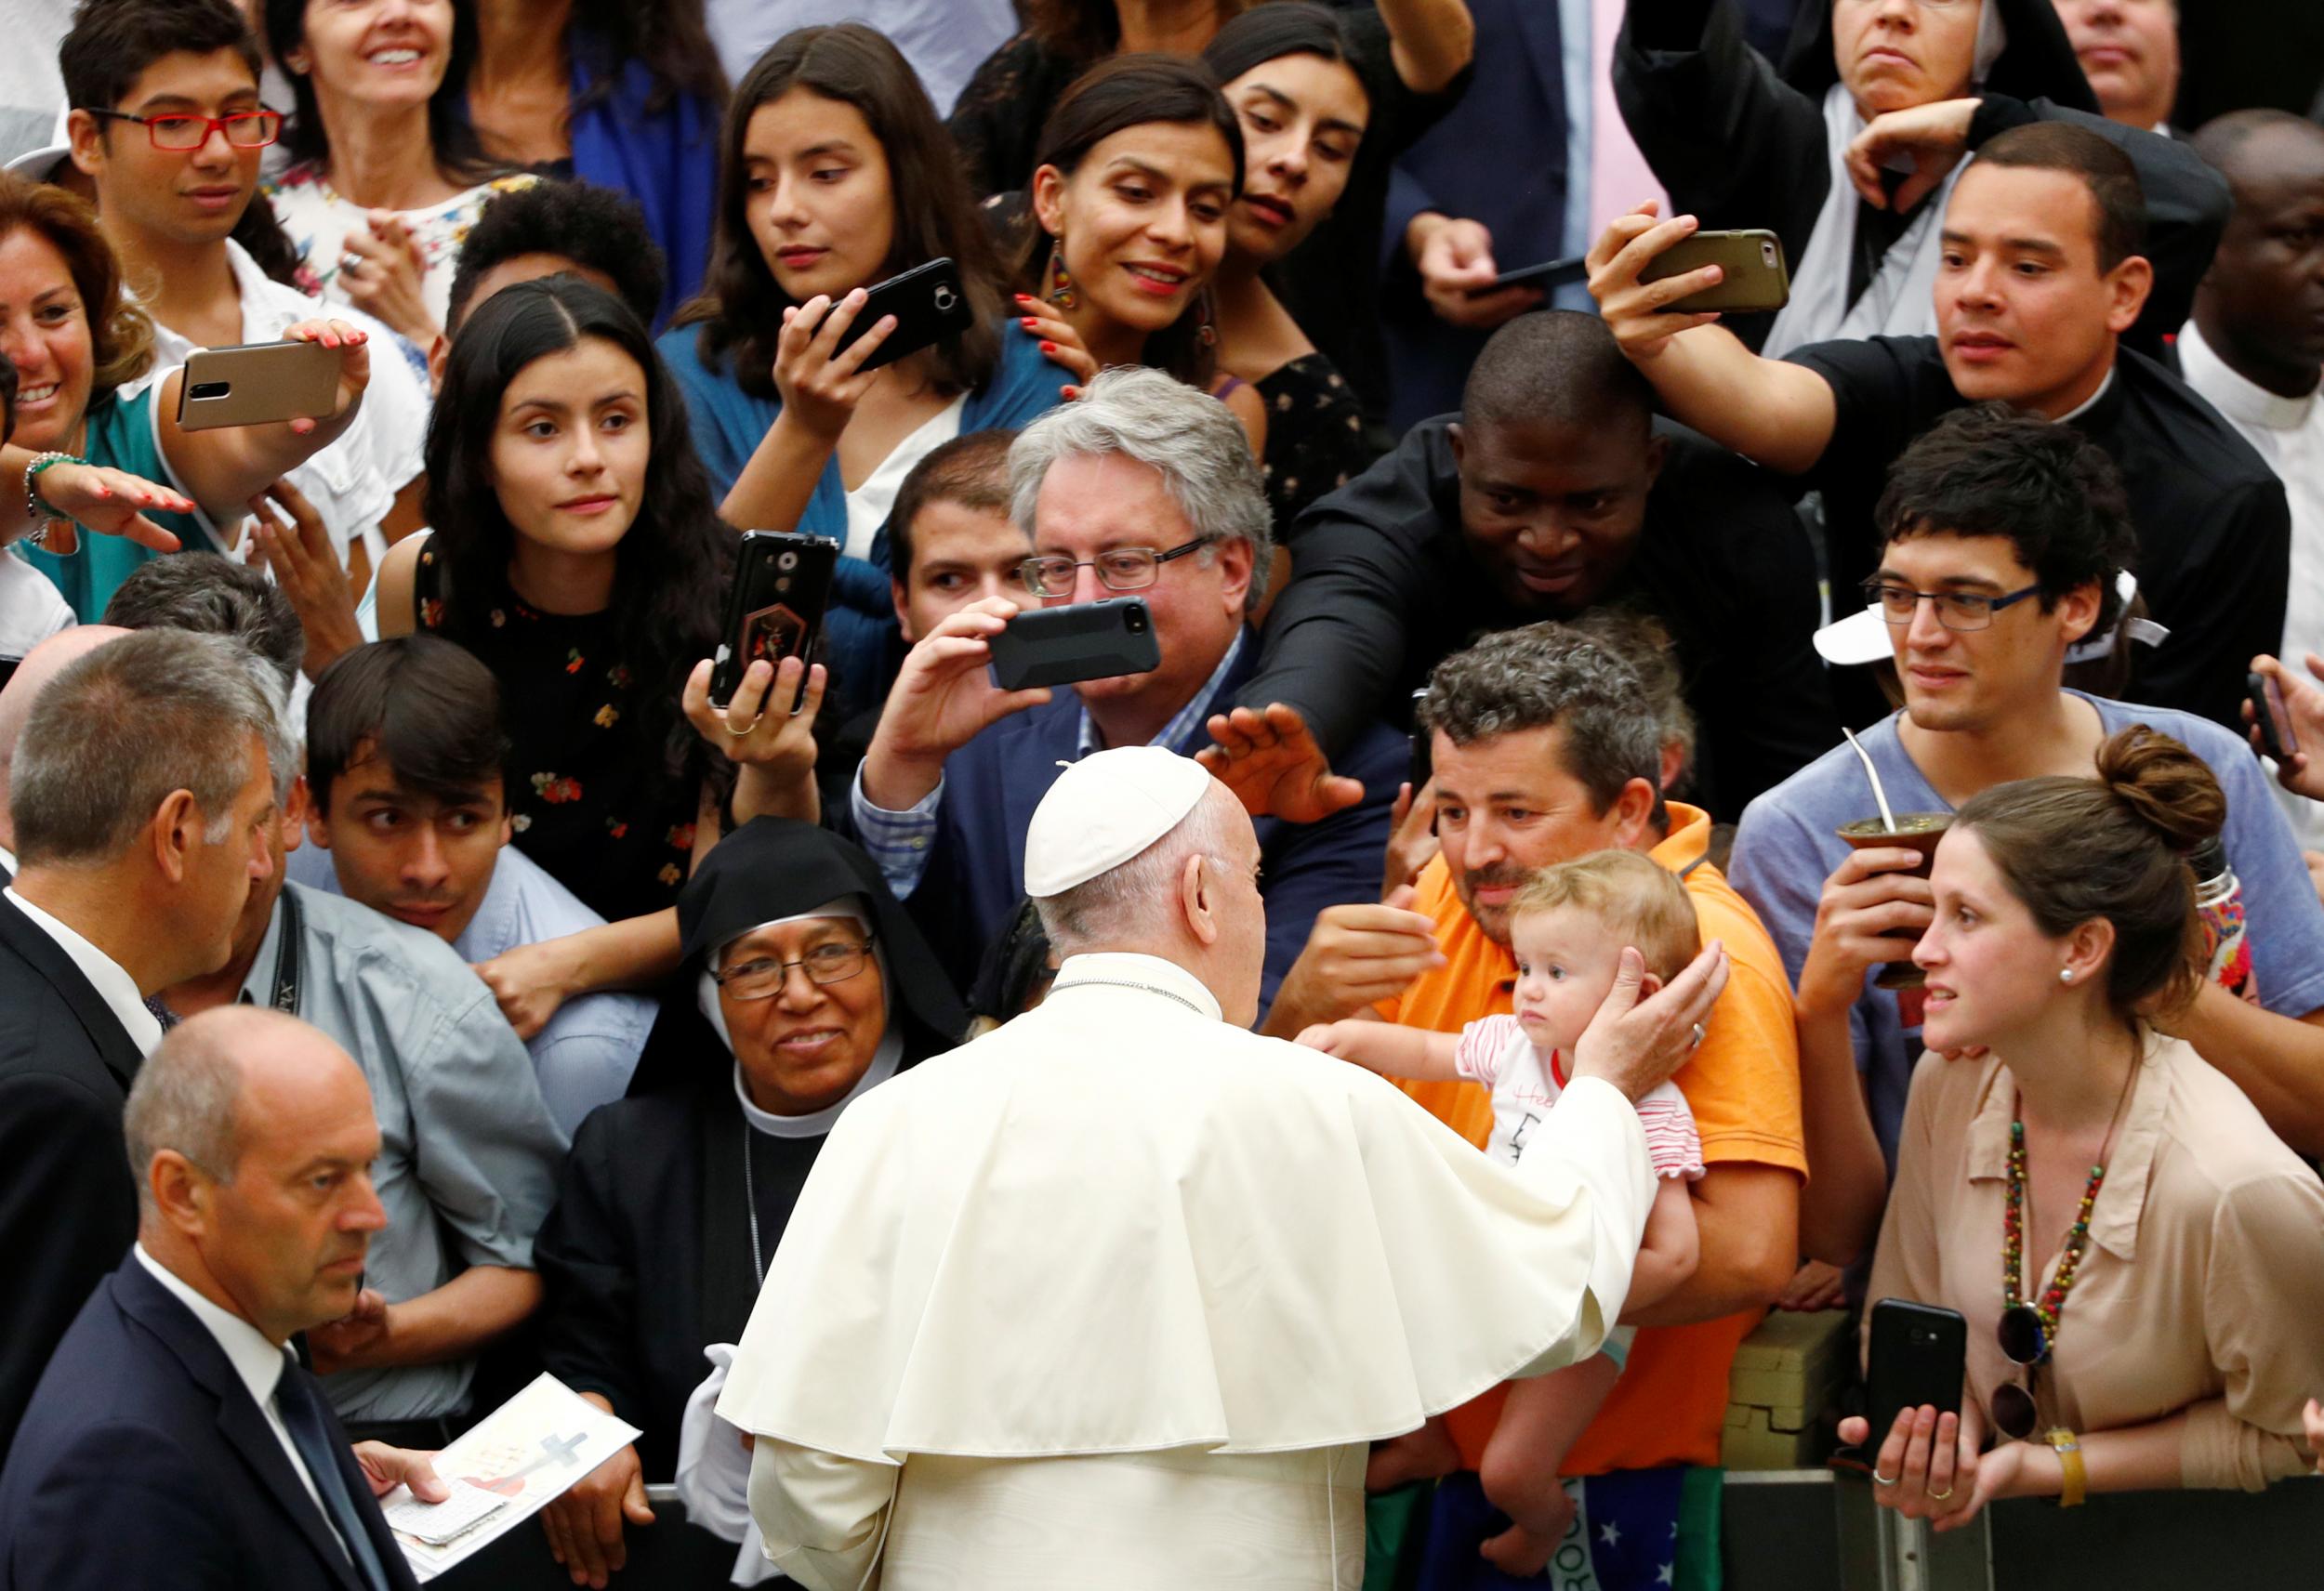 Pope Francis greets a child as he arrives to lead the general audience at the Paul VI Hall in Vatican, 1 August, 2018.